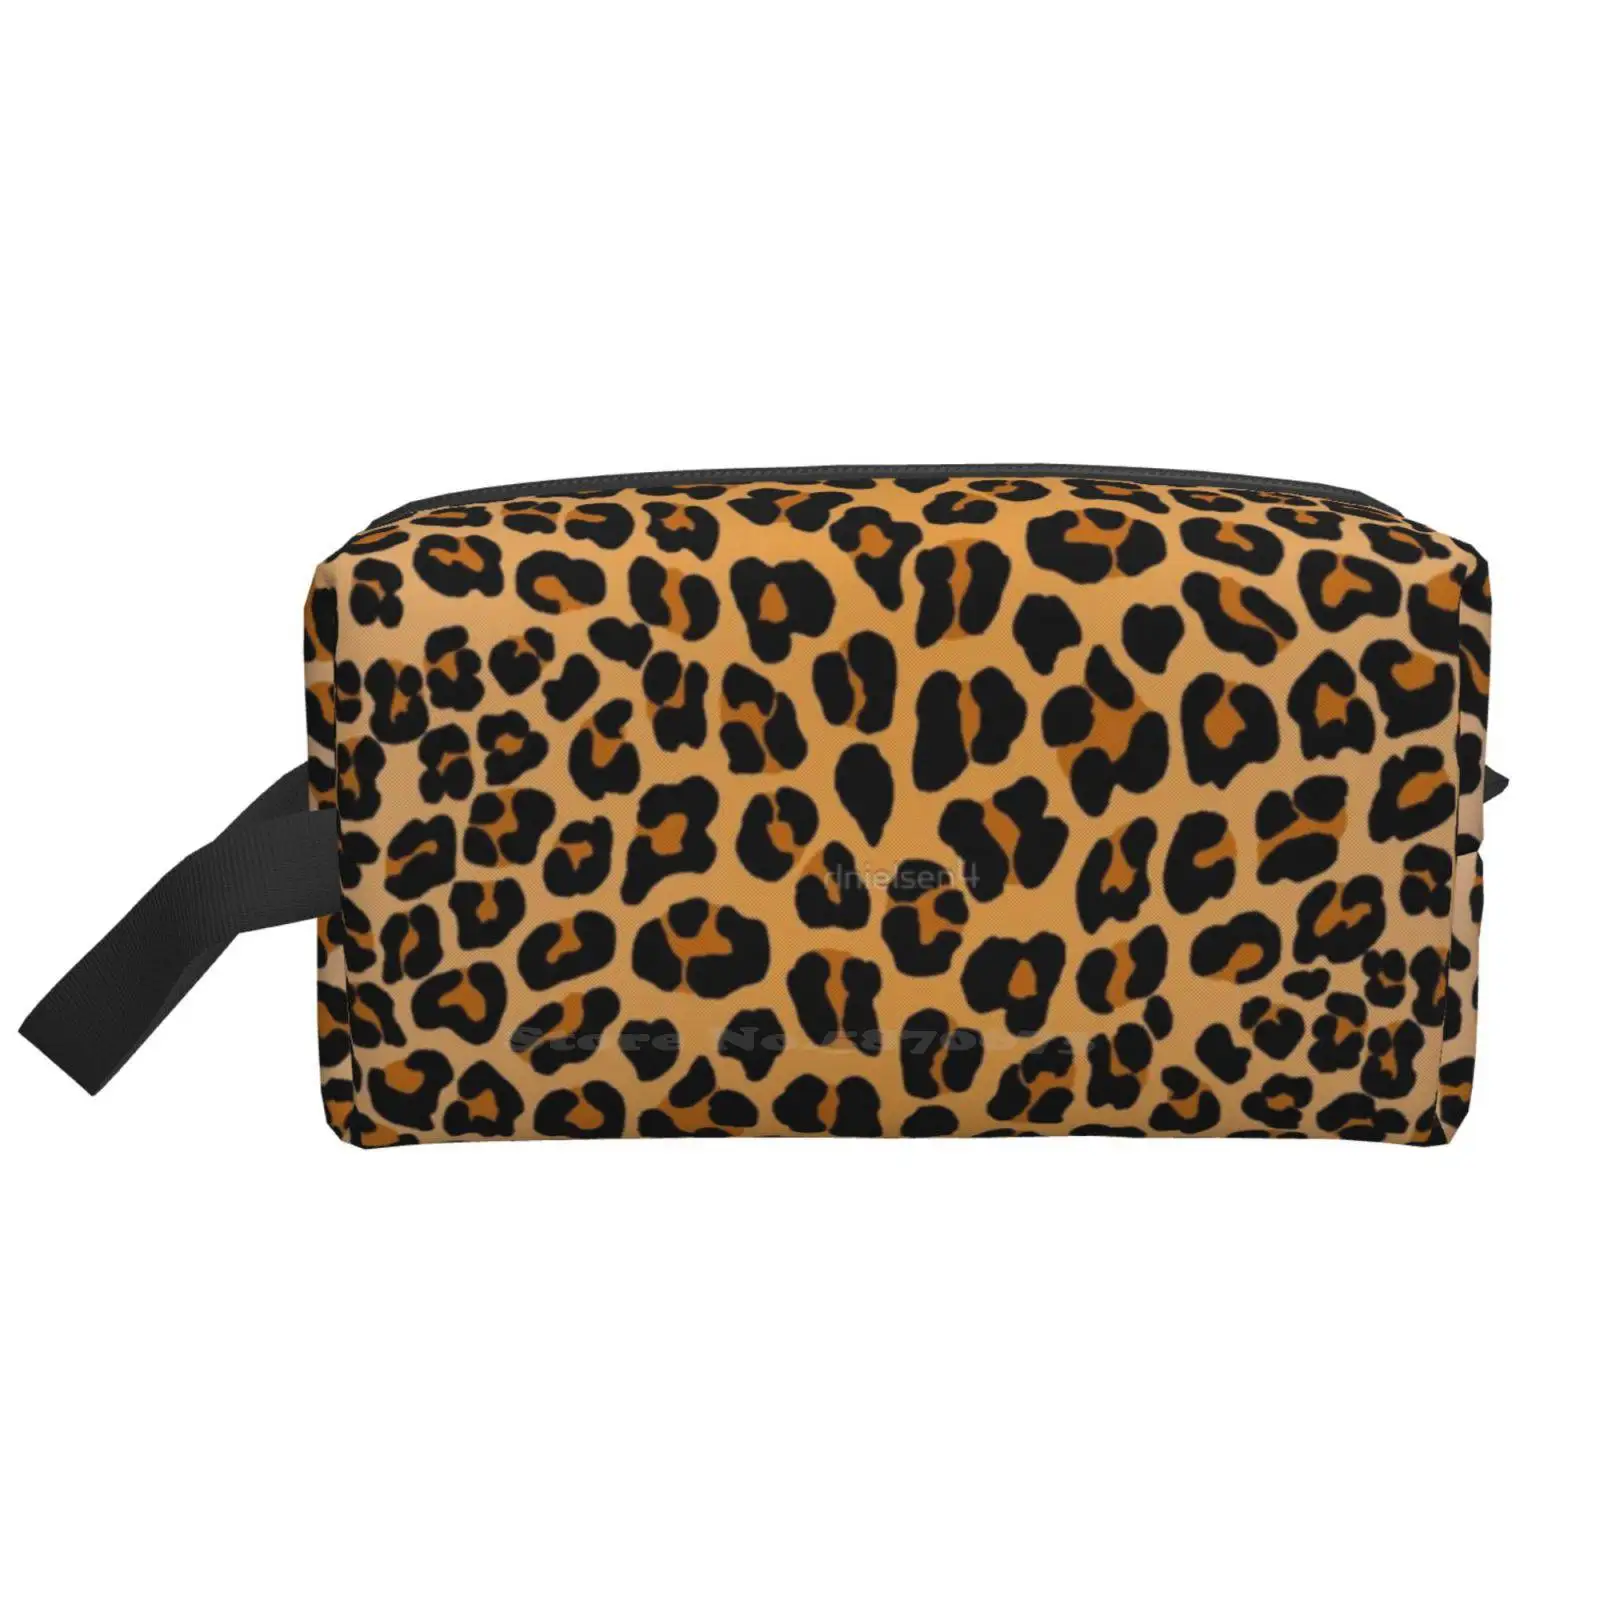 

Leopard Print Travel Sport Storage Bags Large Size Leopard Cheetah Animal Spotted Big Cats Orange And Black Fashionable Trendy